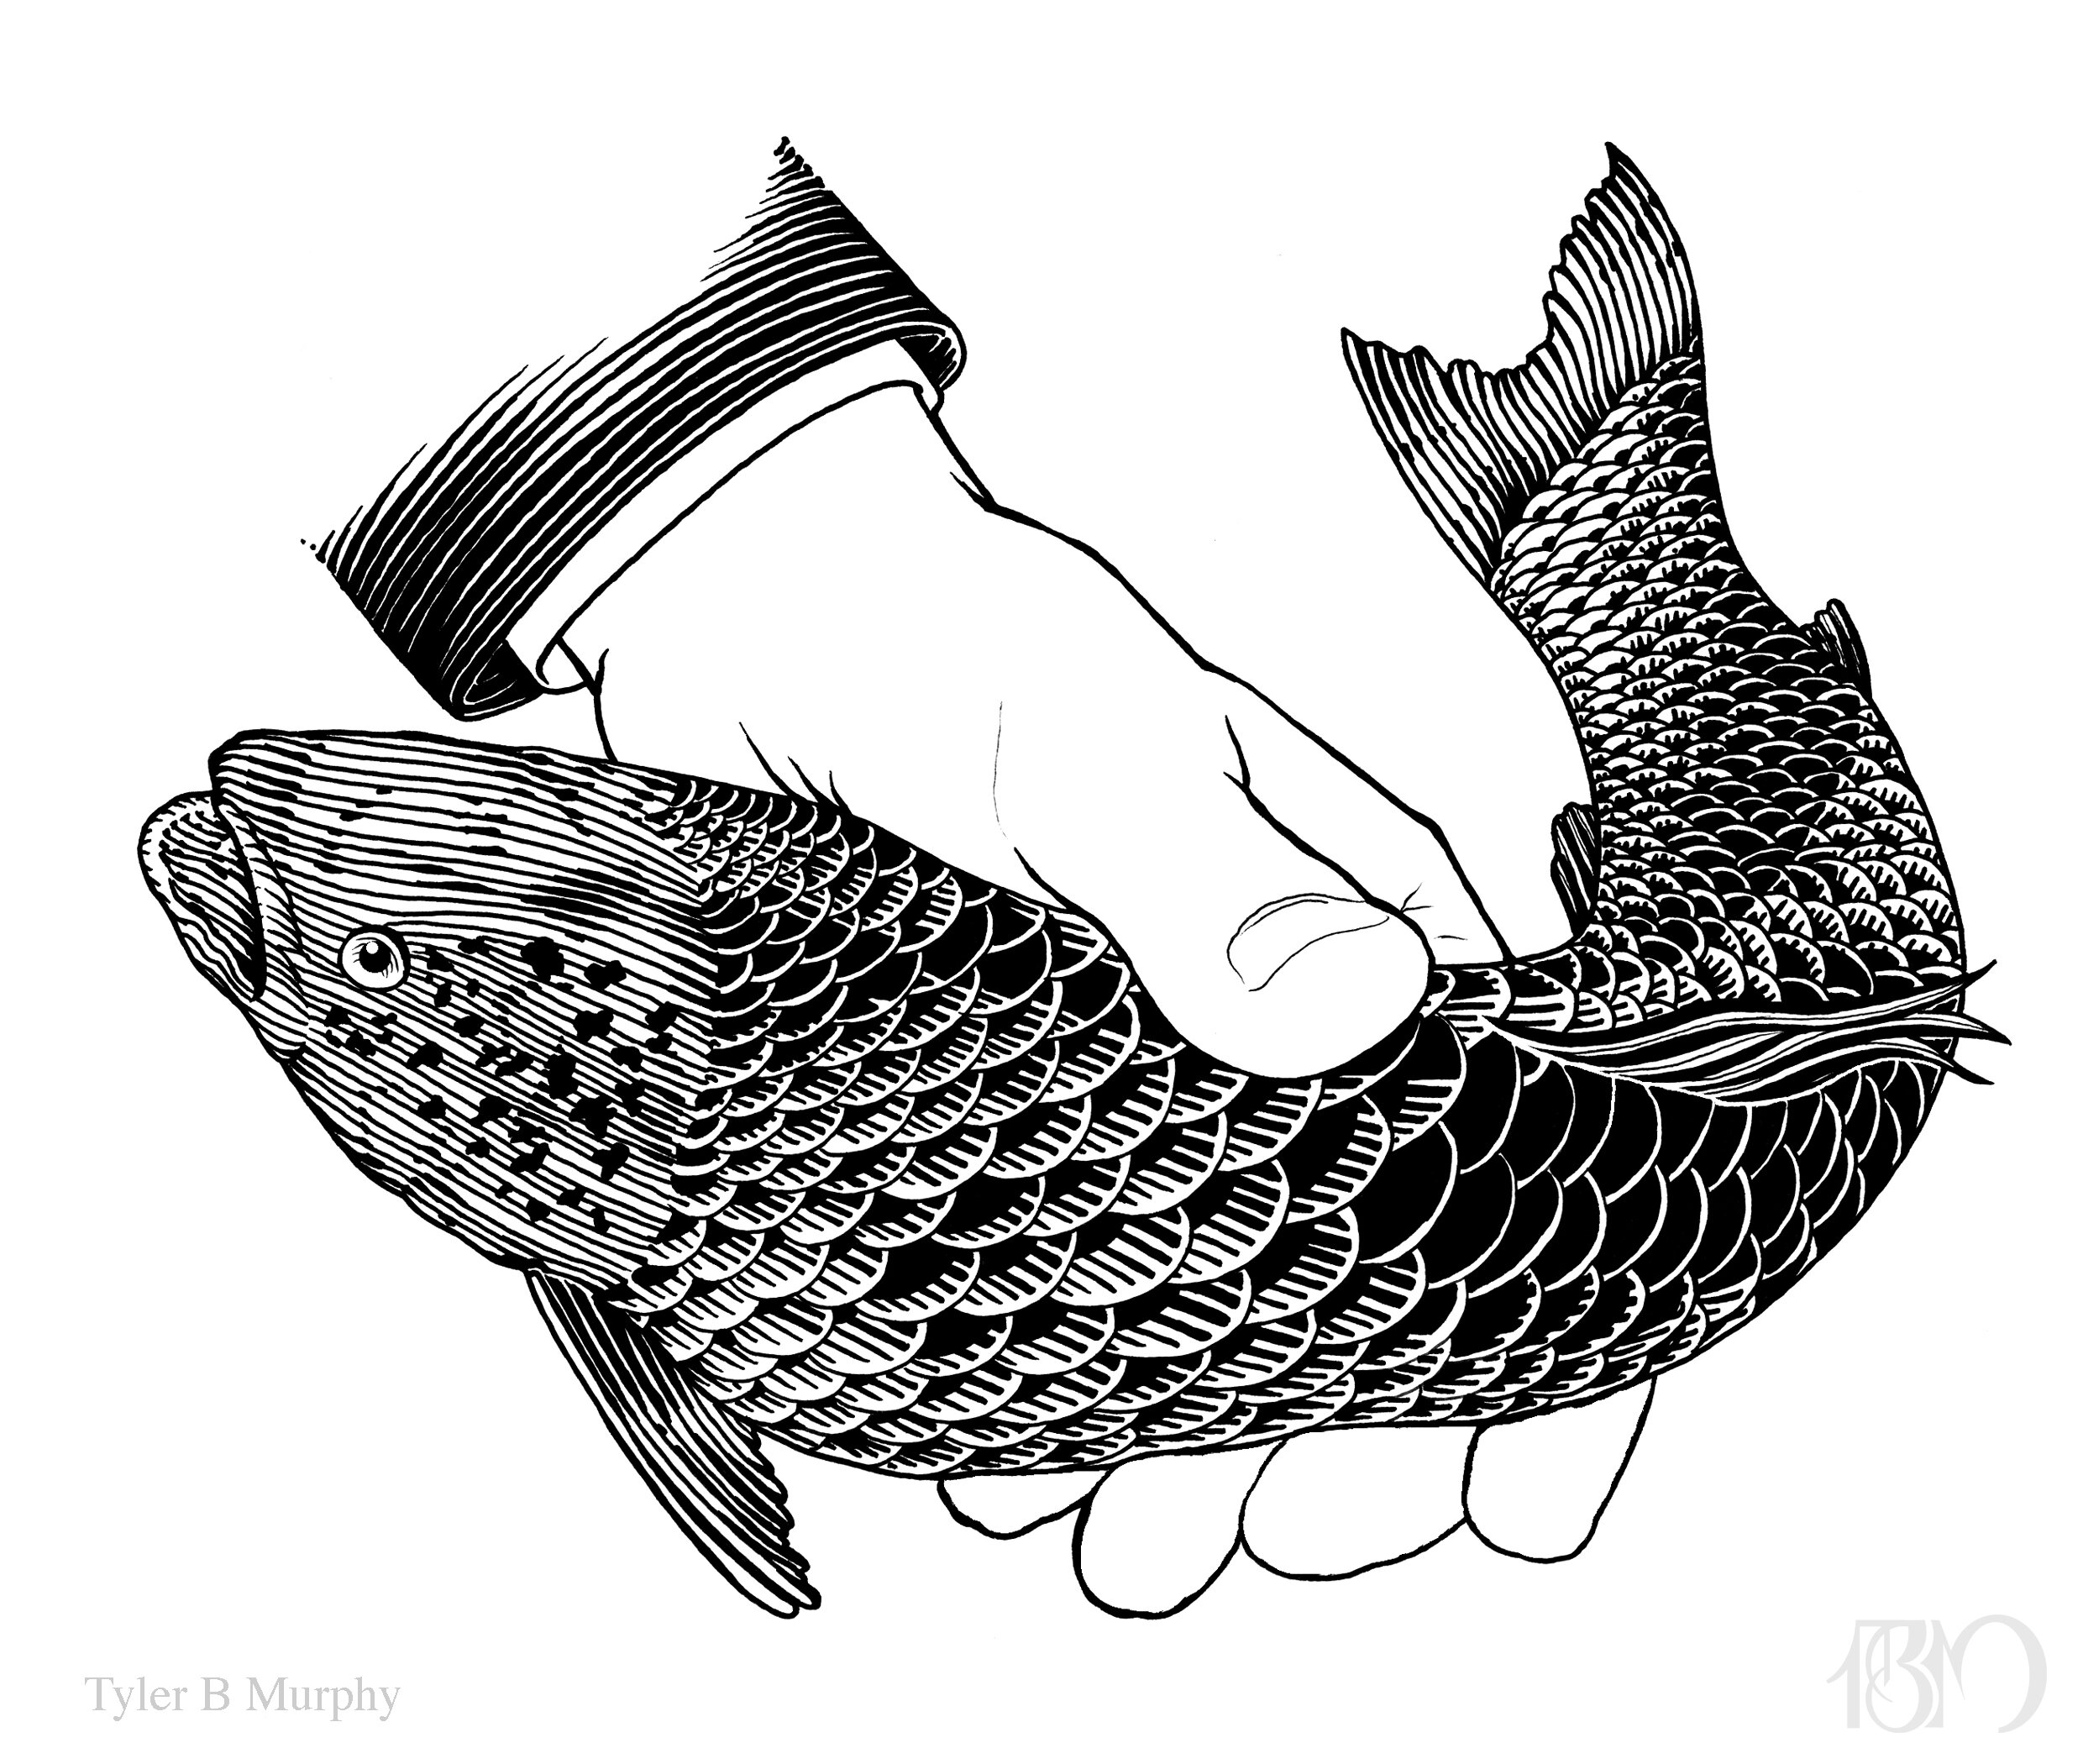 5 -Illustration of a man's hand holding a fish by Tyler B Murphy.jpg